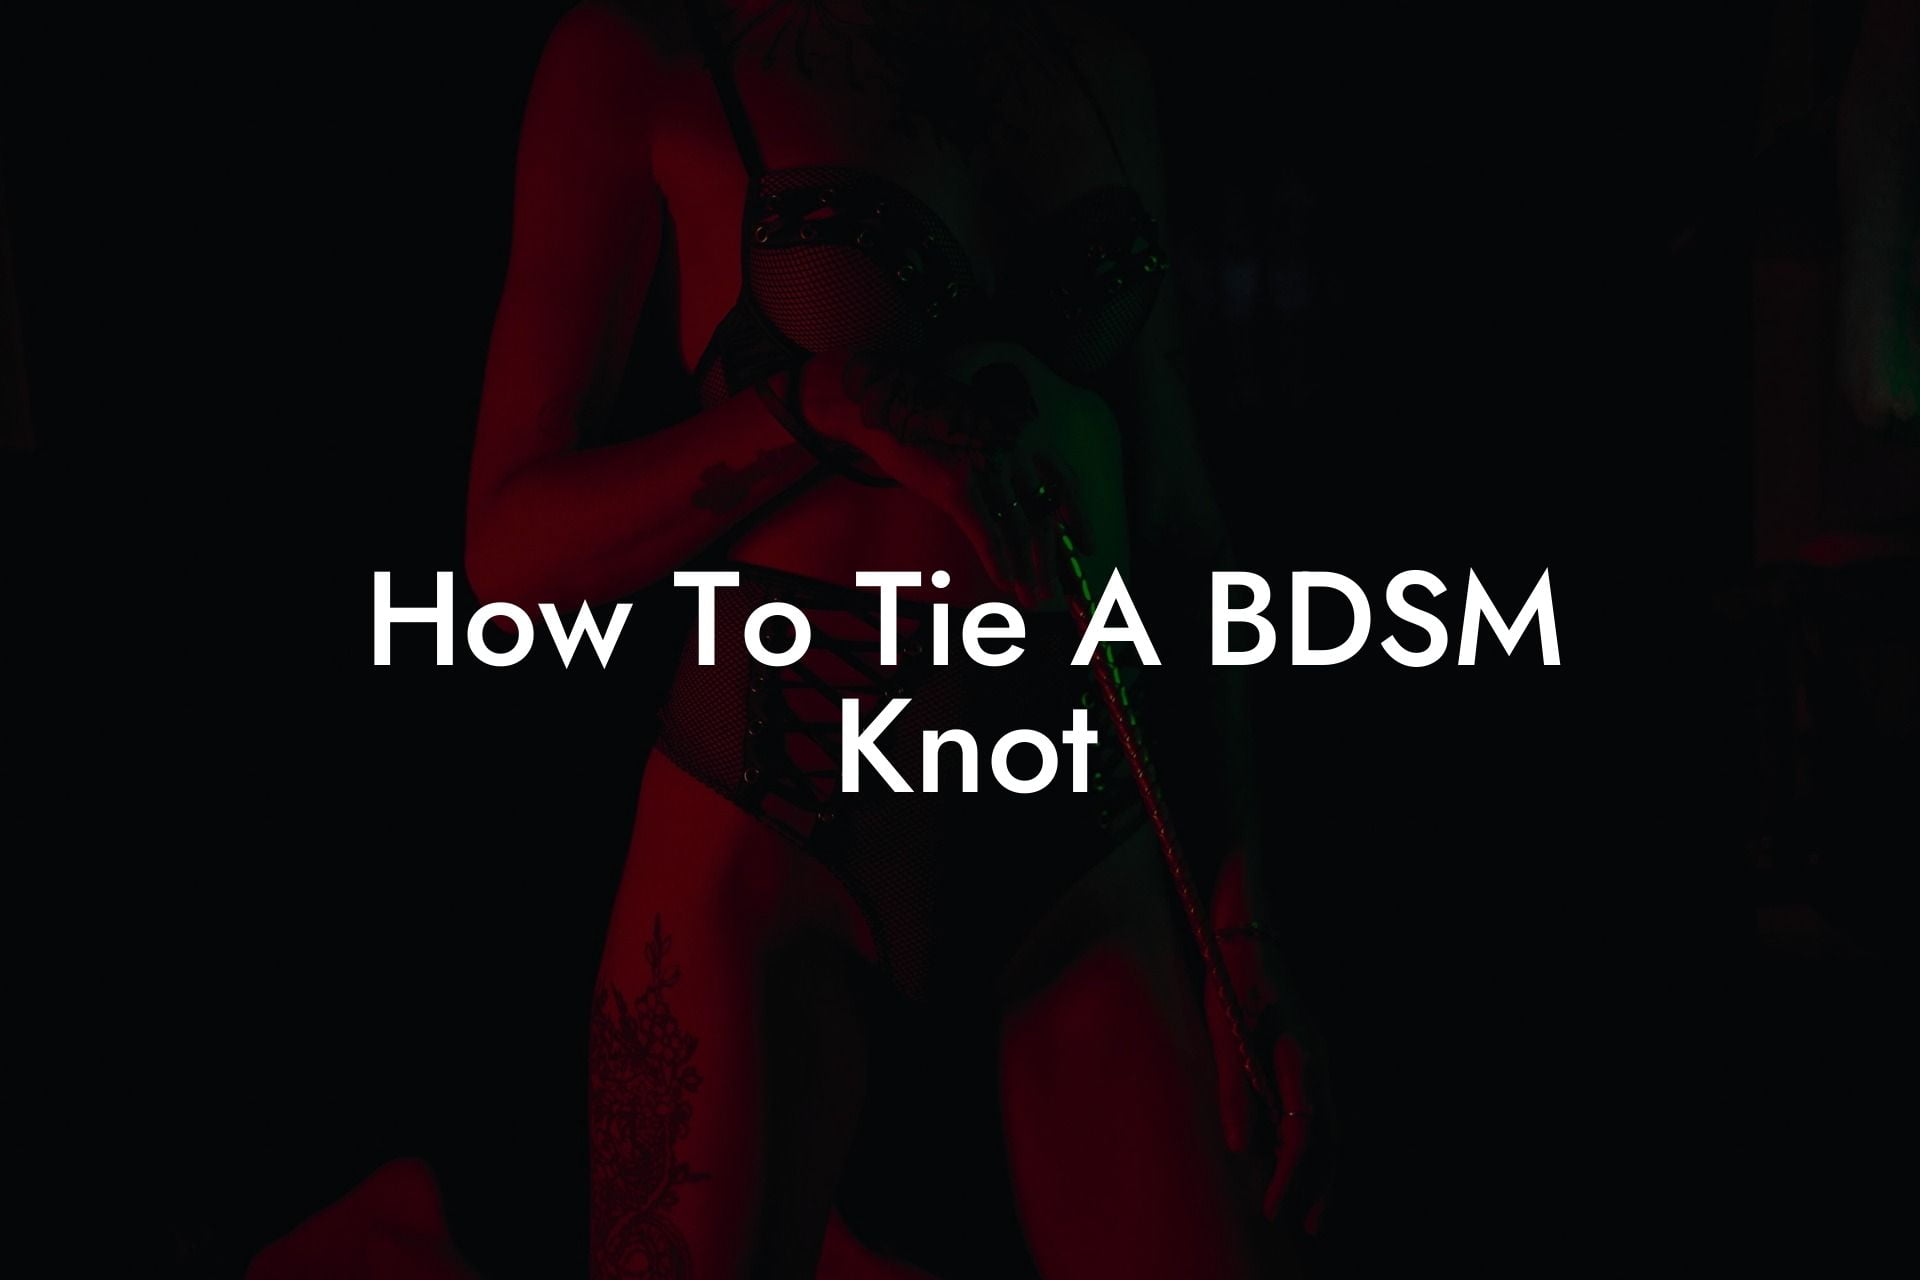 How To Tie A BDSM Knot